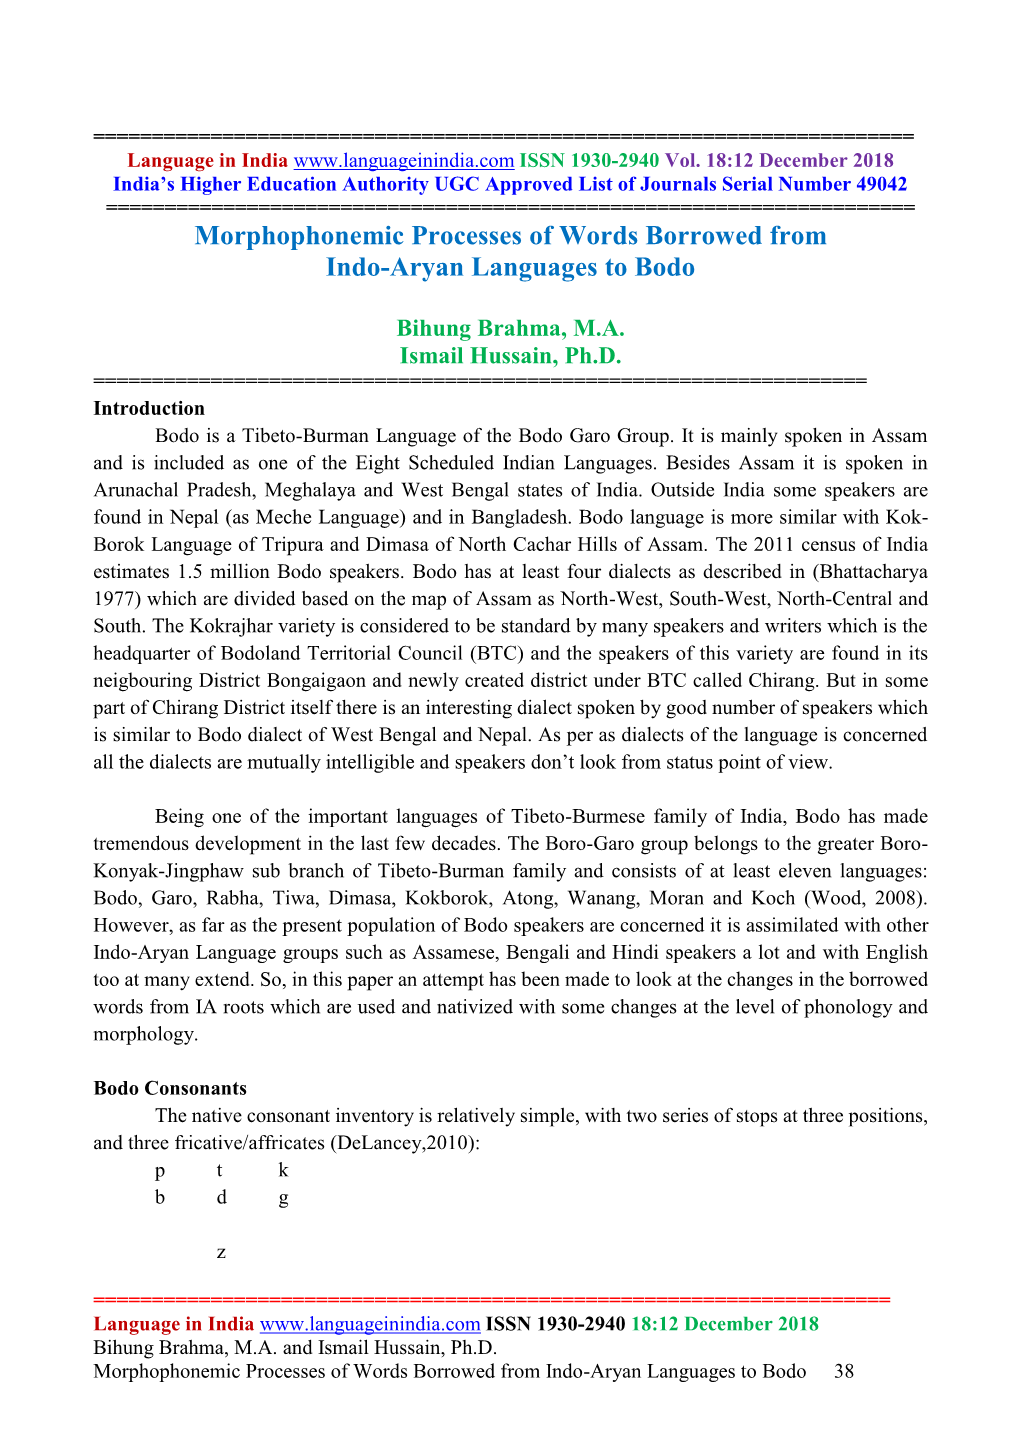 Morphophonemic Processes of Words Borrowed from Indo-Aryan Languages to Bodo